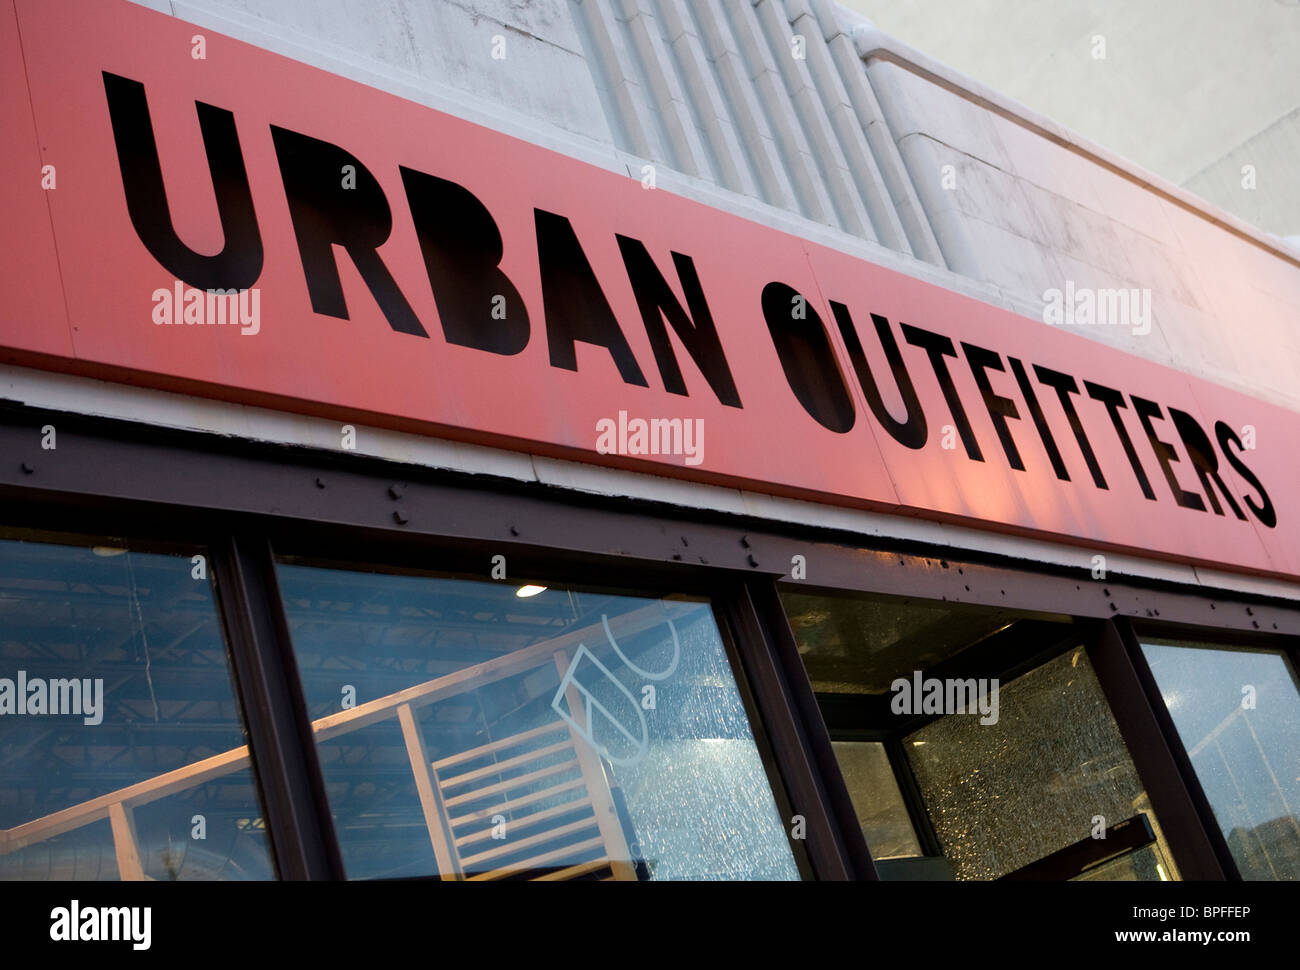 A Urban Outfitters retail store in Washington, DC Stock Photo - Alamy